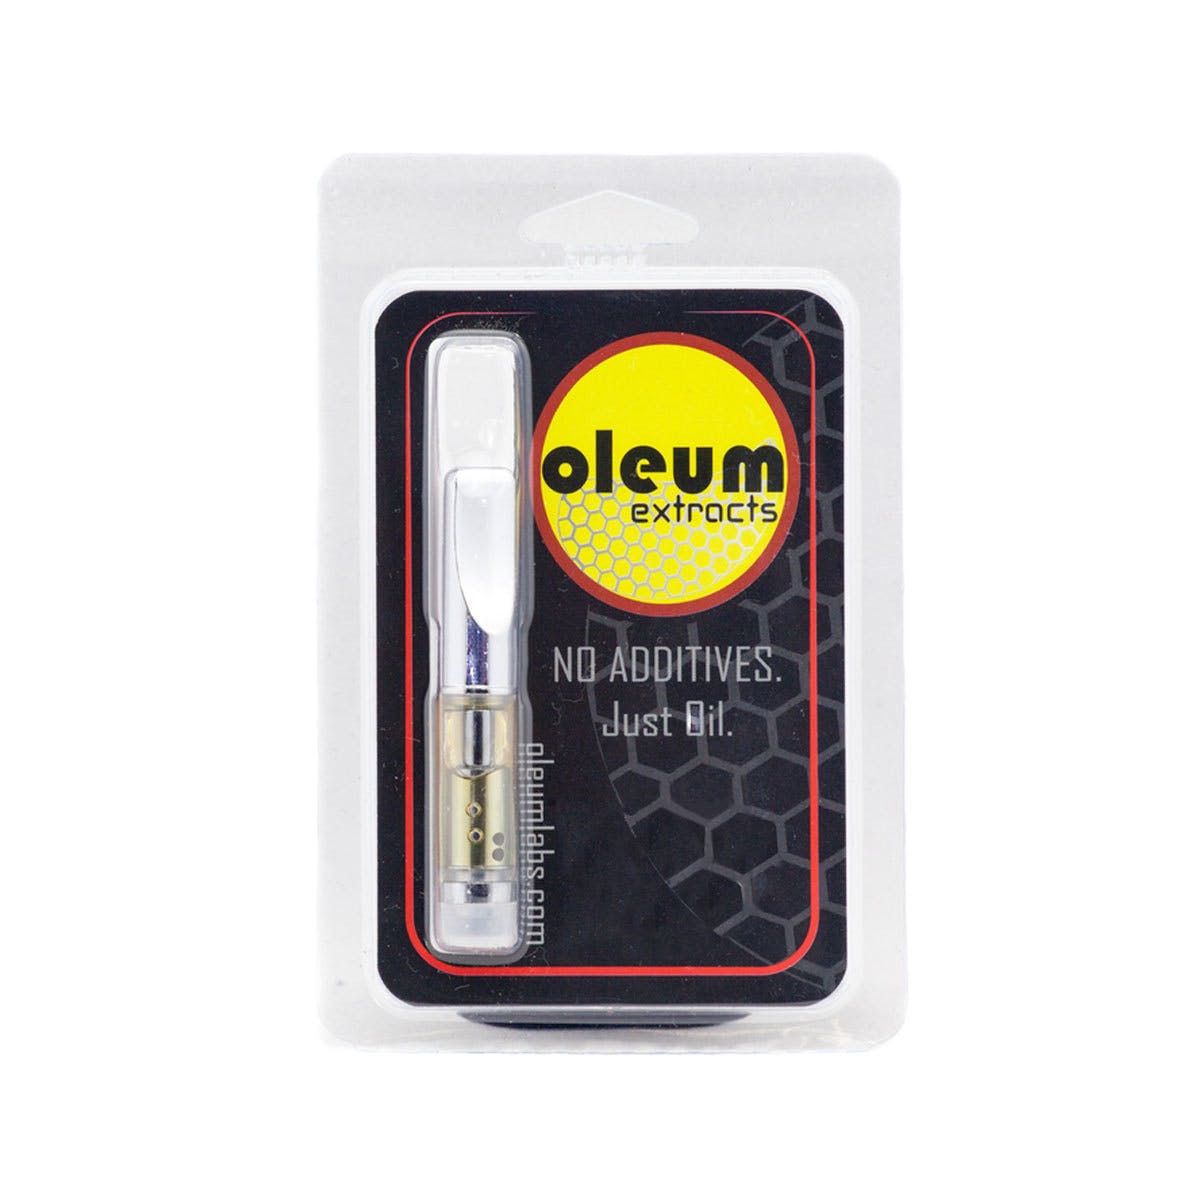 concentrate-oleum-extracts-cinex-distillate-cartridge